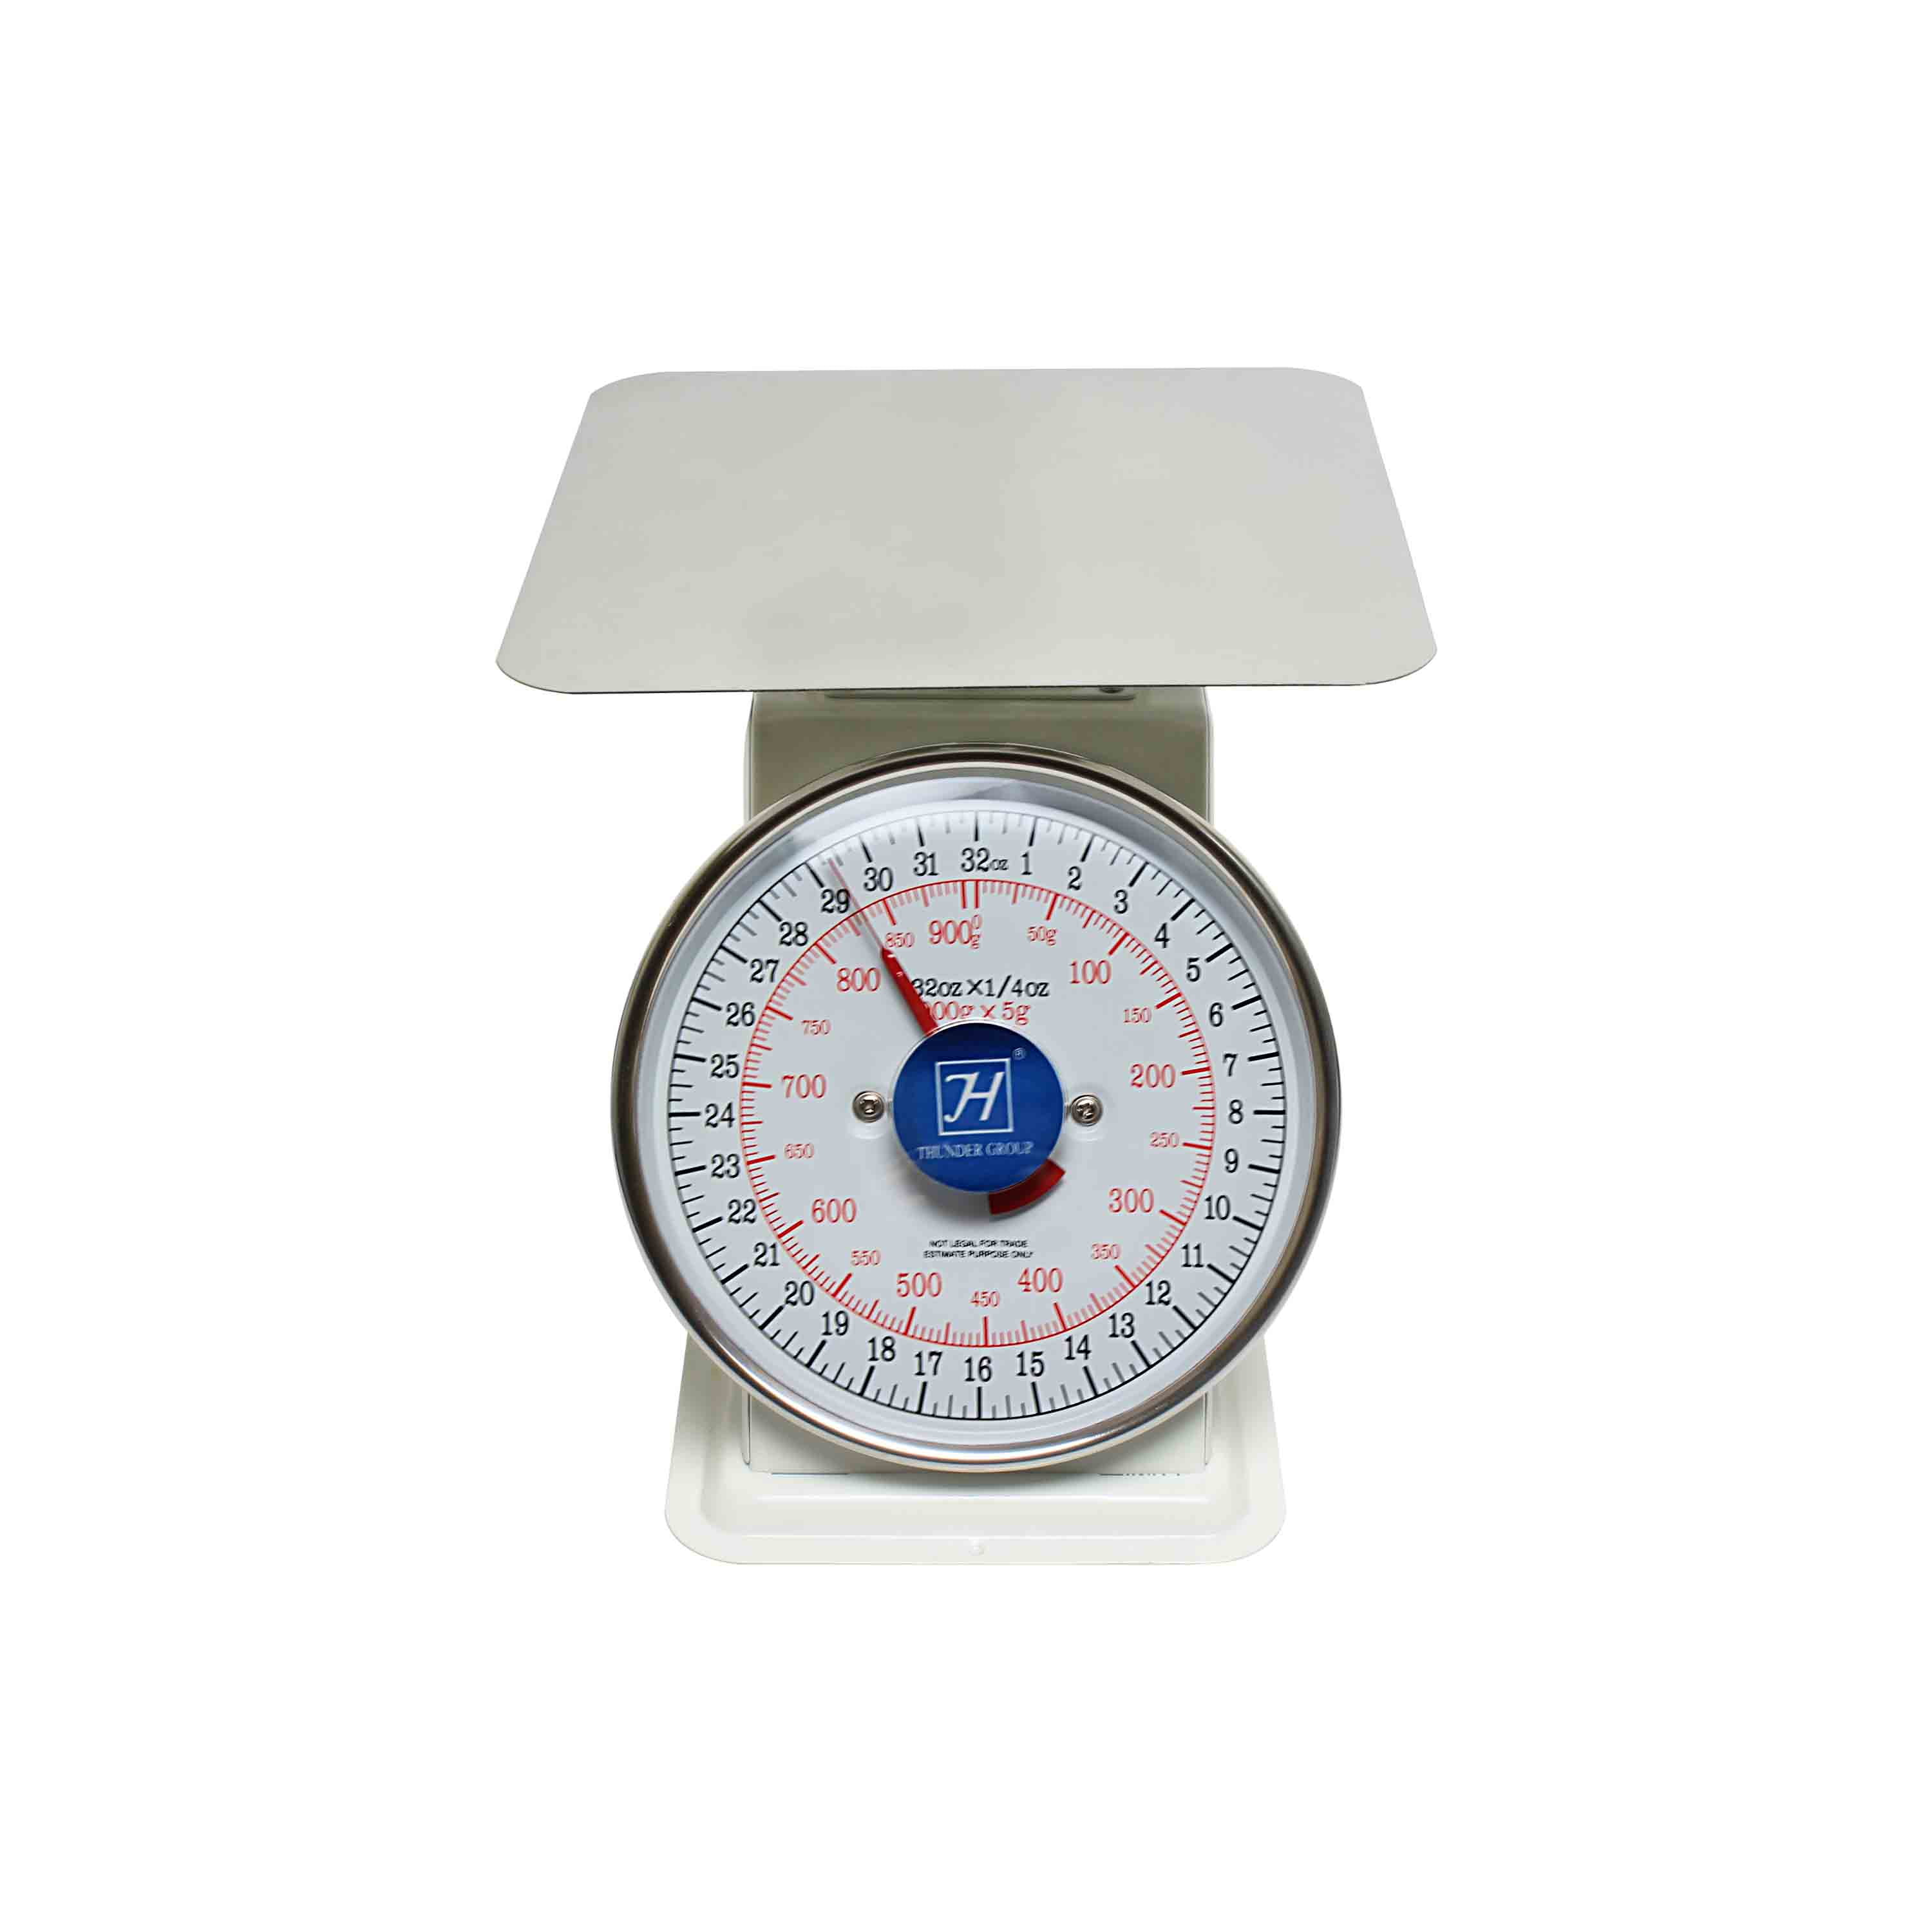 Excellante 2-Pound Mechanical Scale 